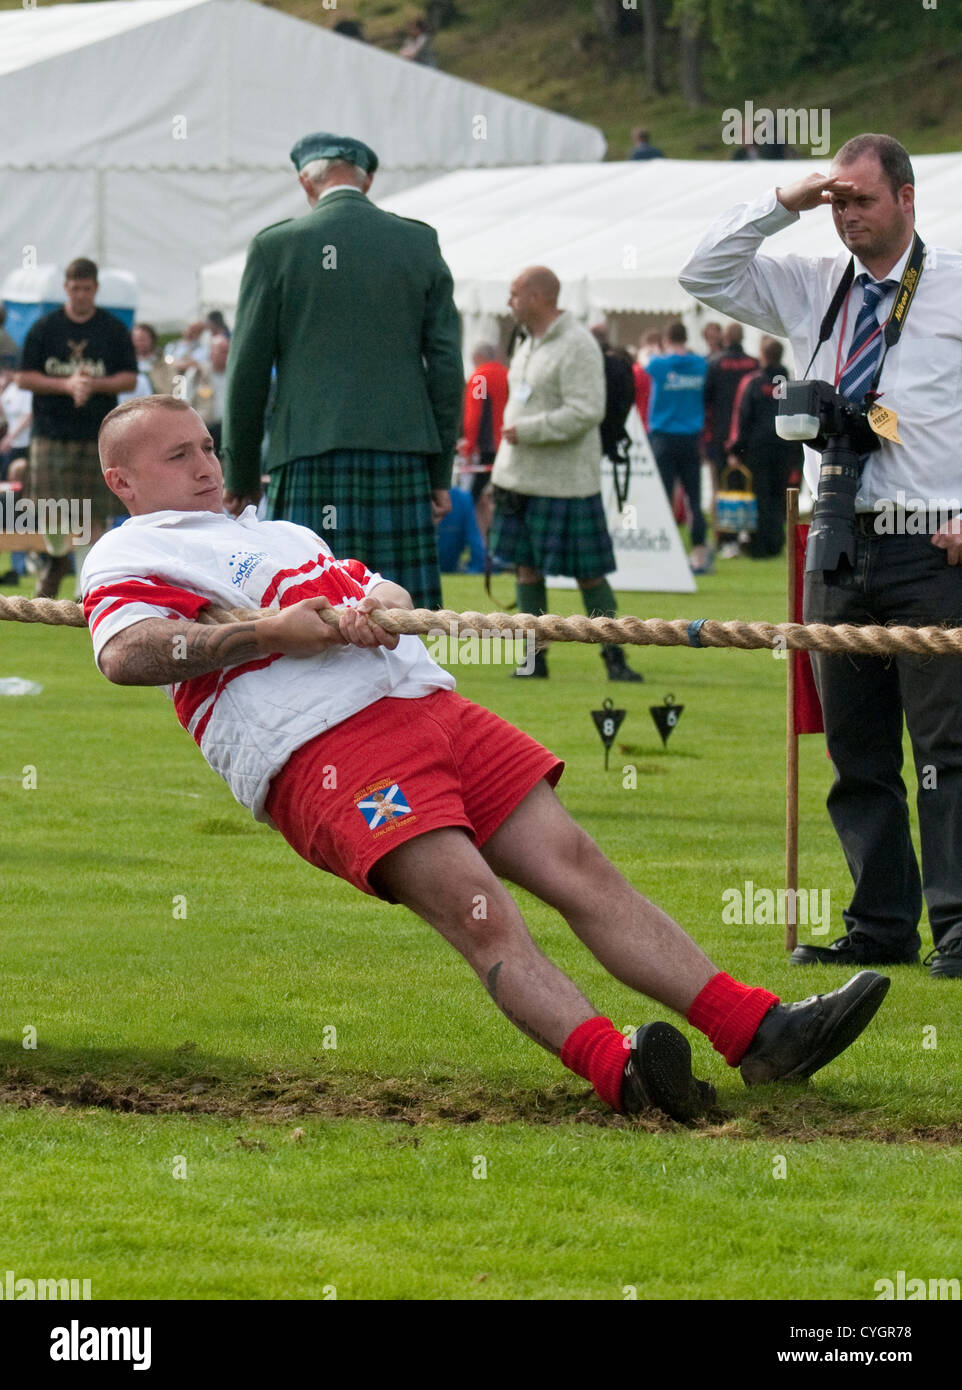 Team member taking part in a 'Tug of War' event at a Scottish Highland Games Stock Photo